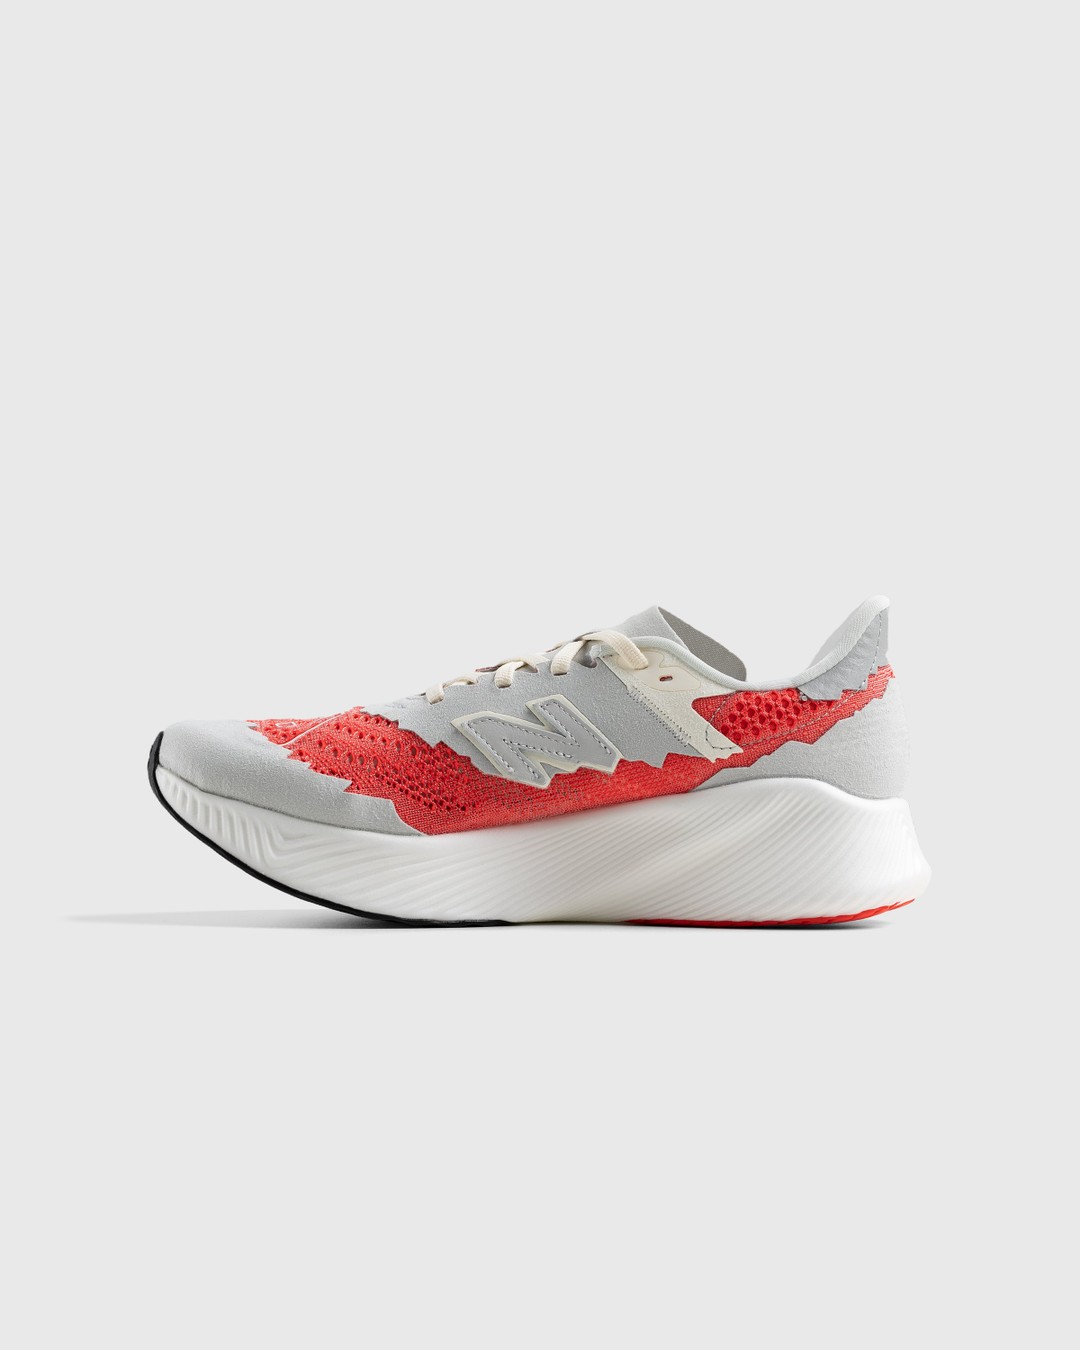 New Balance x Stone Island – FuelCell RC Elite v2 Neo Flame - Sneakers - Red - Image 2